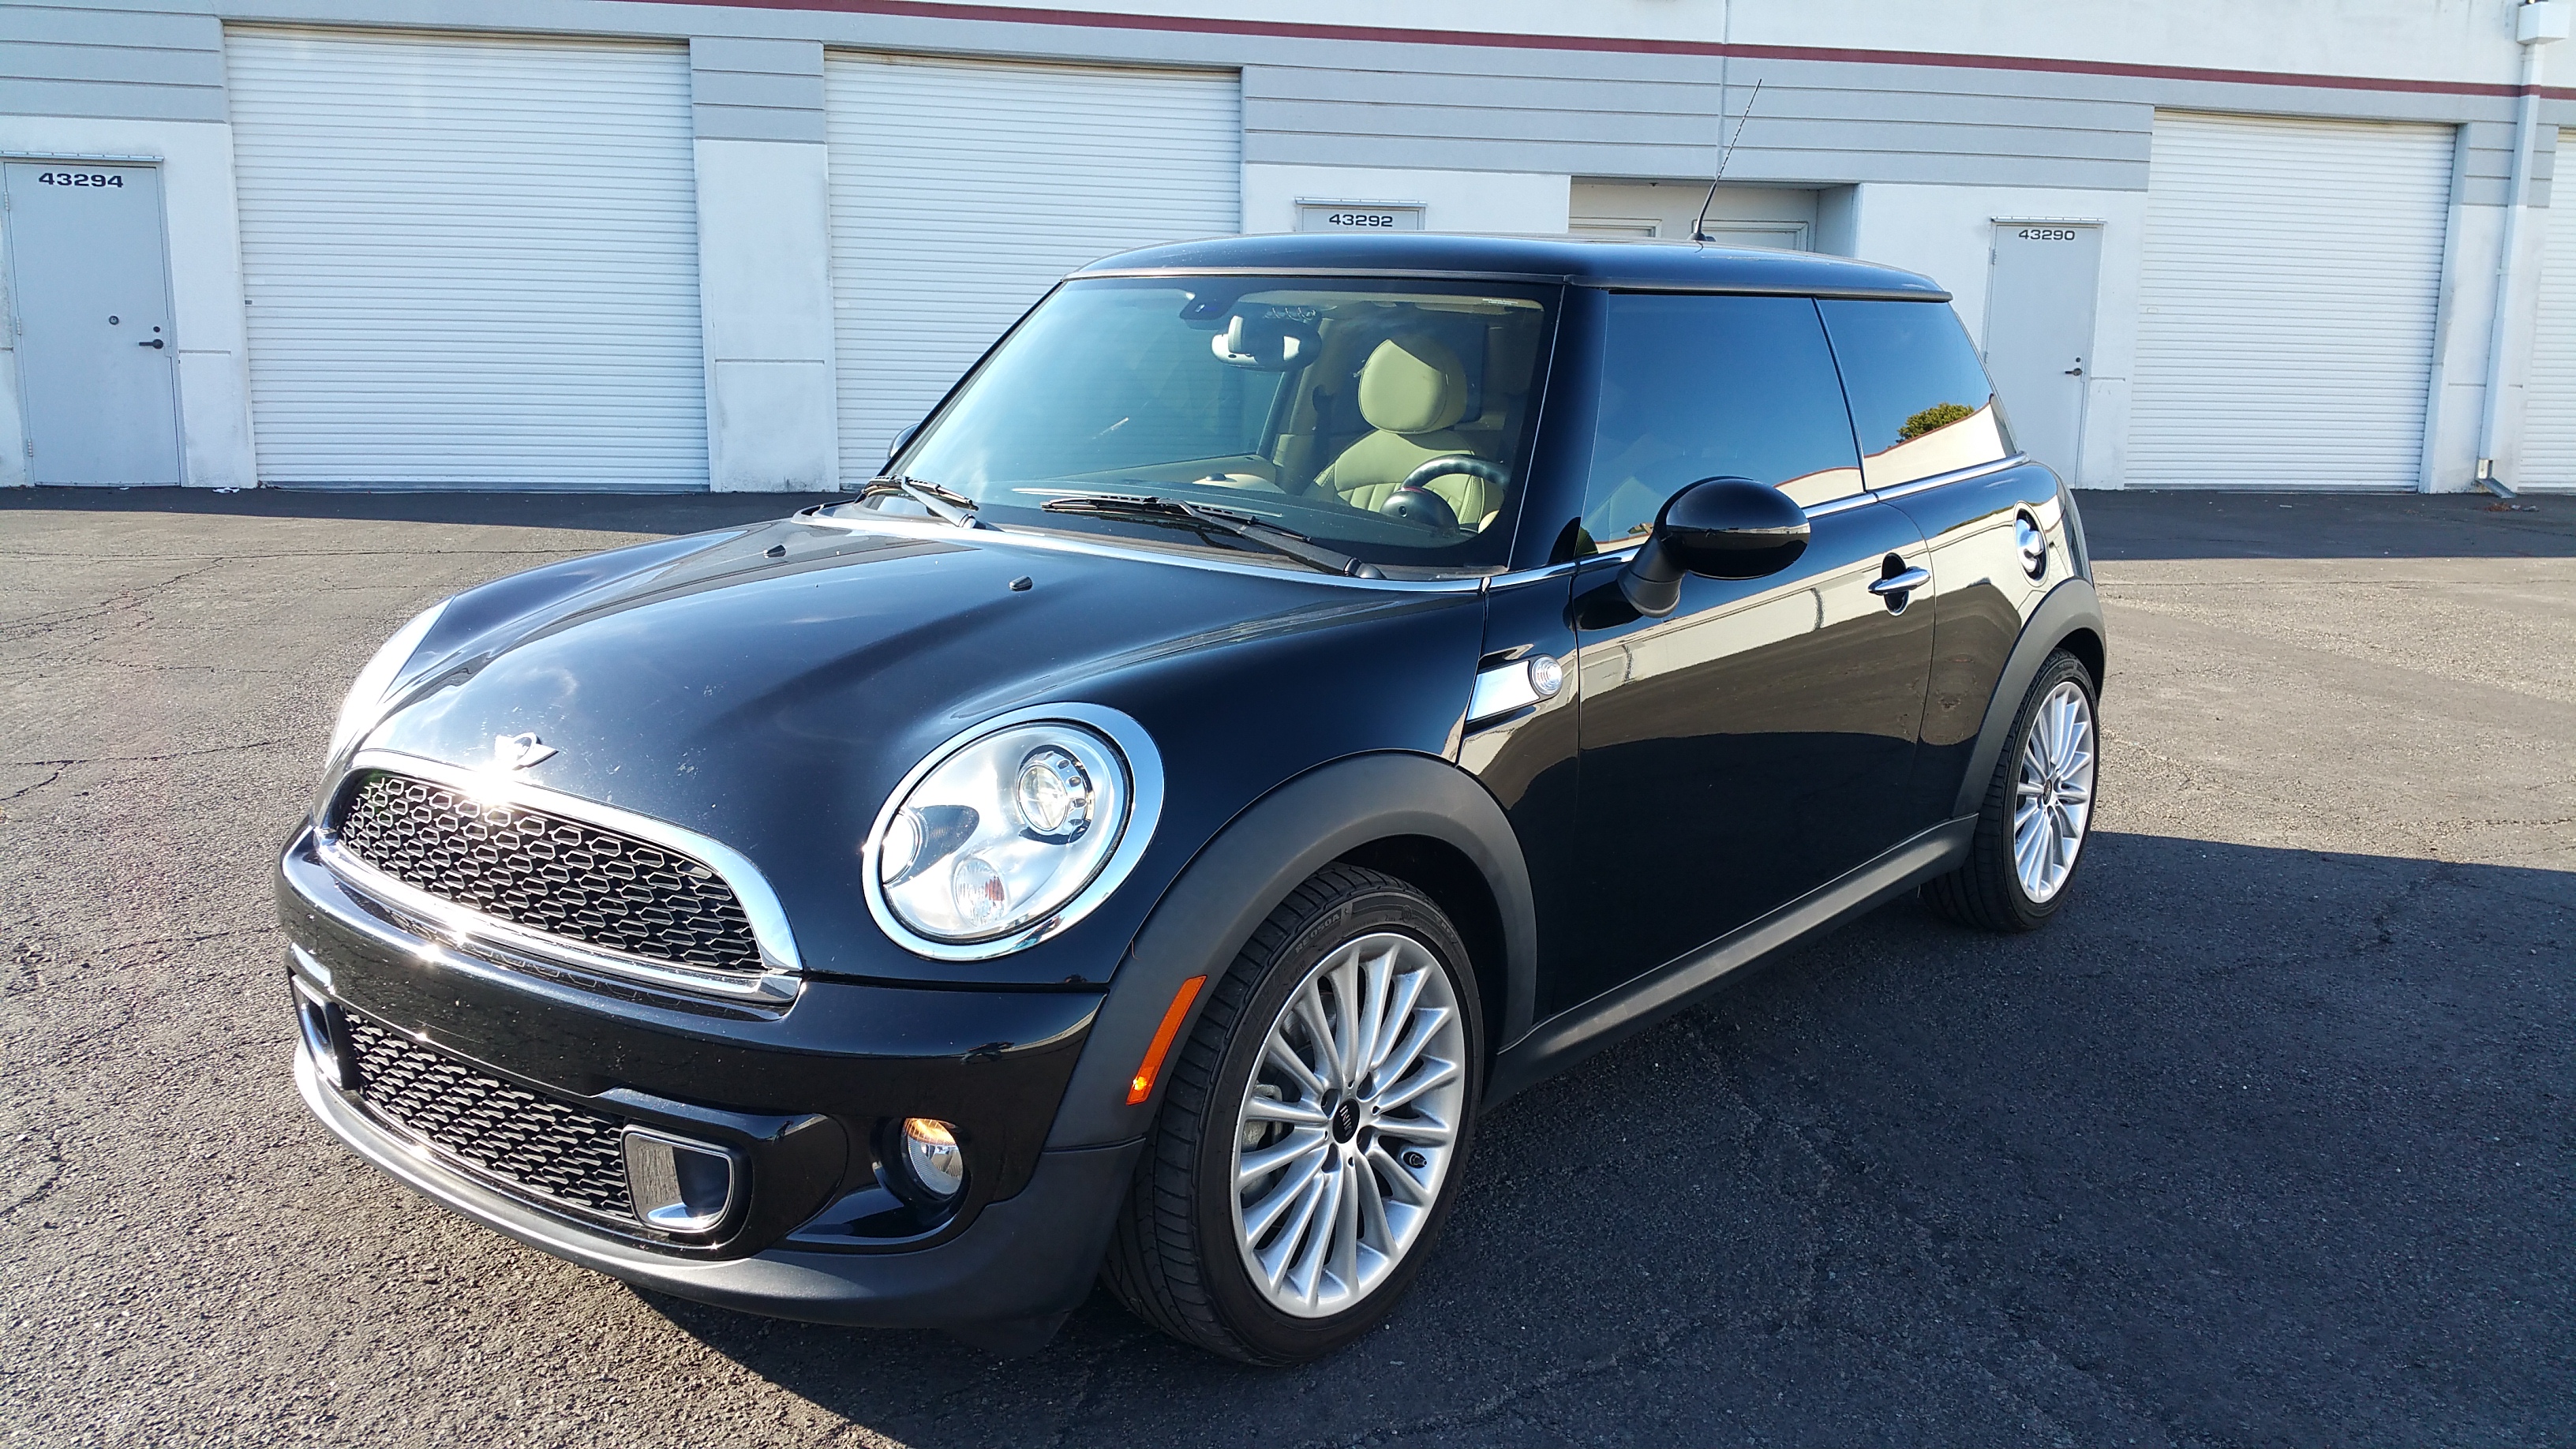 FS:: 2012 MINI Cooper Goodwood Bespoke Edition!!! 1 of 1000 in the ...